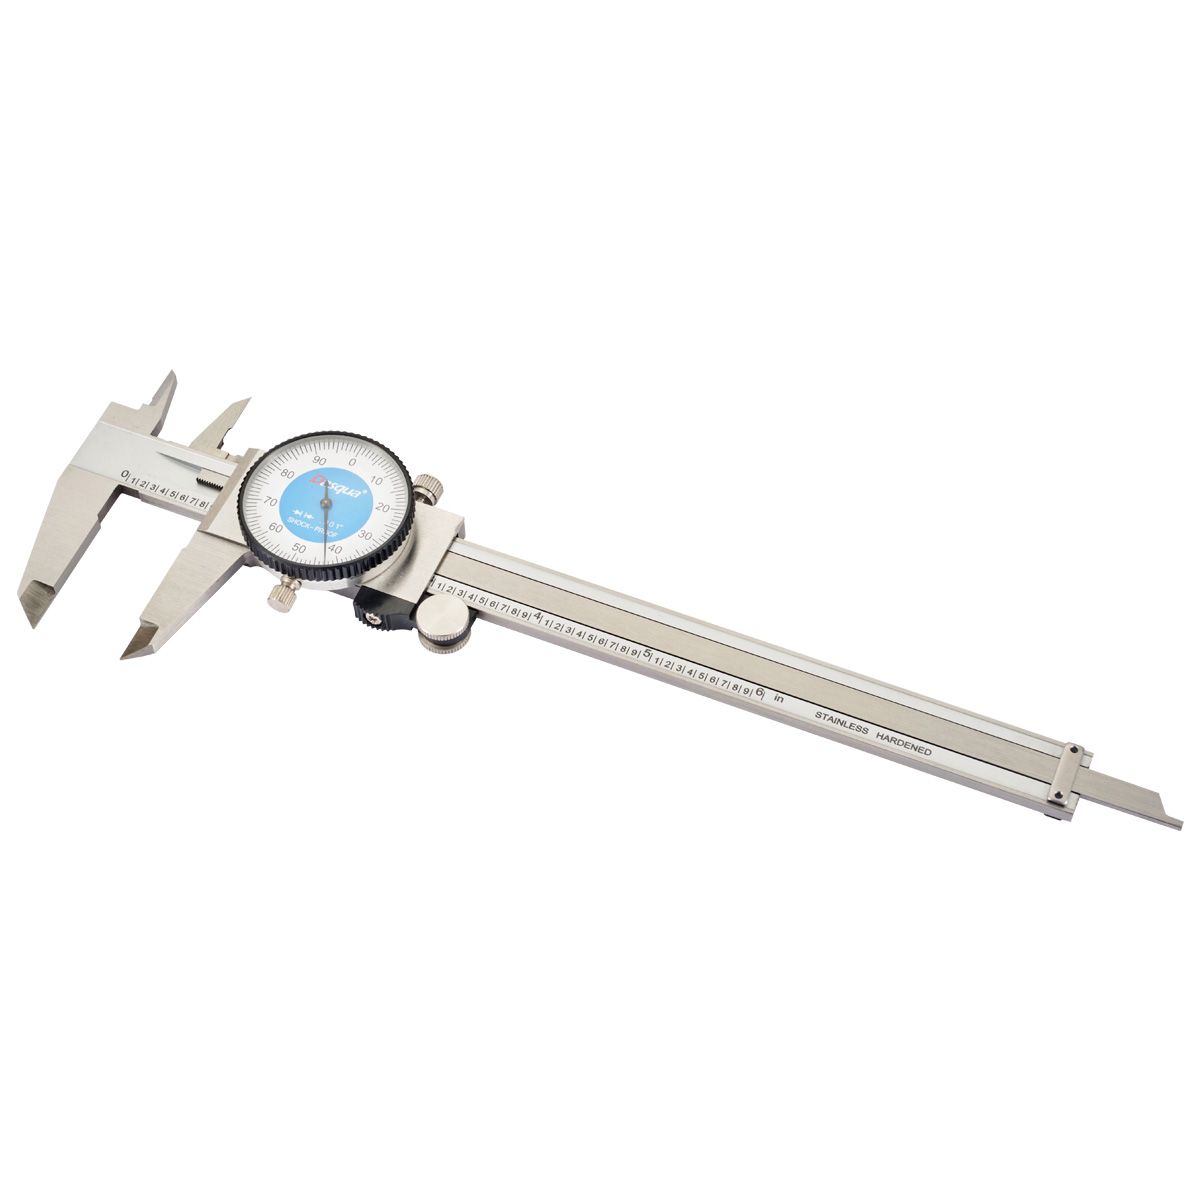 DASQUA 0-6" STAINLESS STEEL DIAL CALIPER WITH DEPTH GAGE (2210-8280)